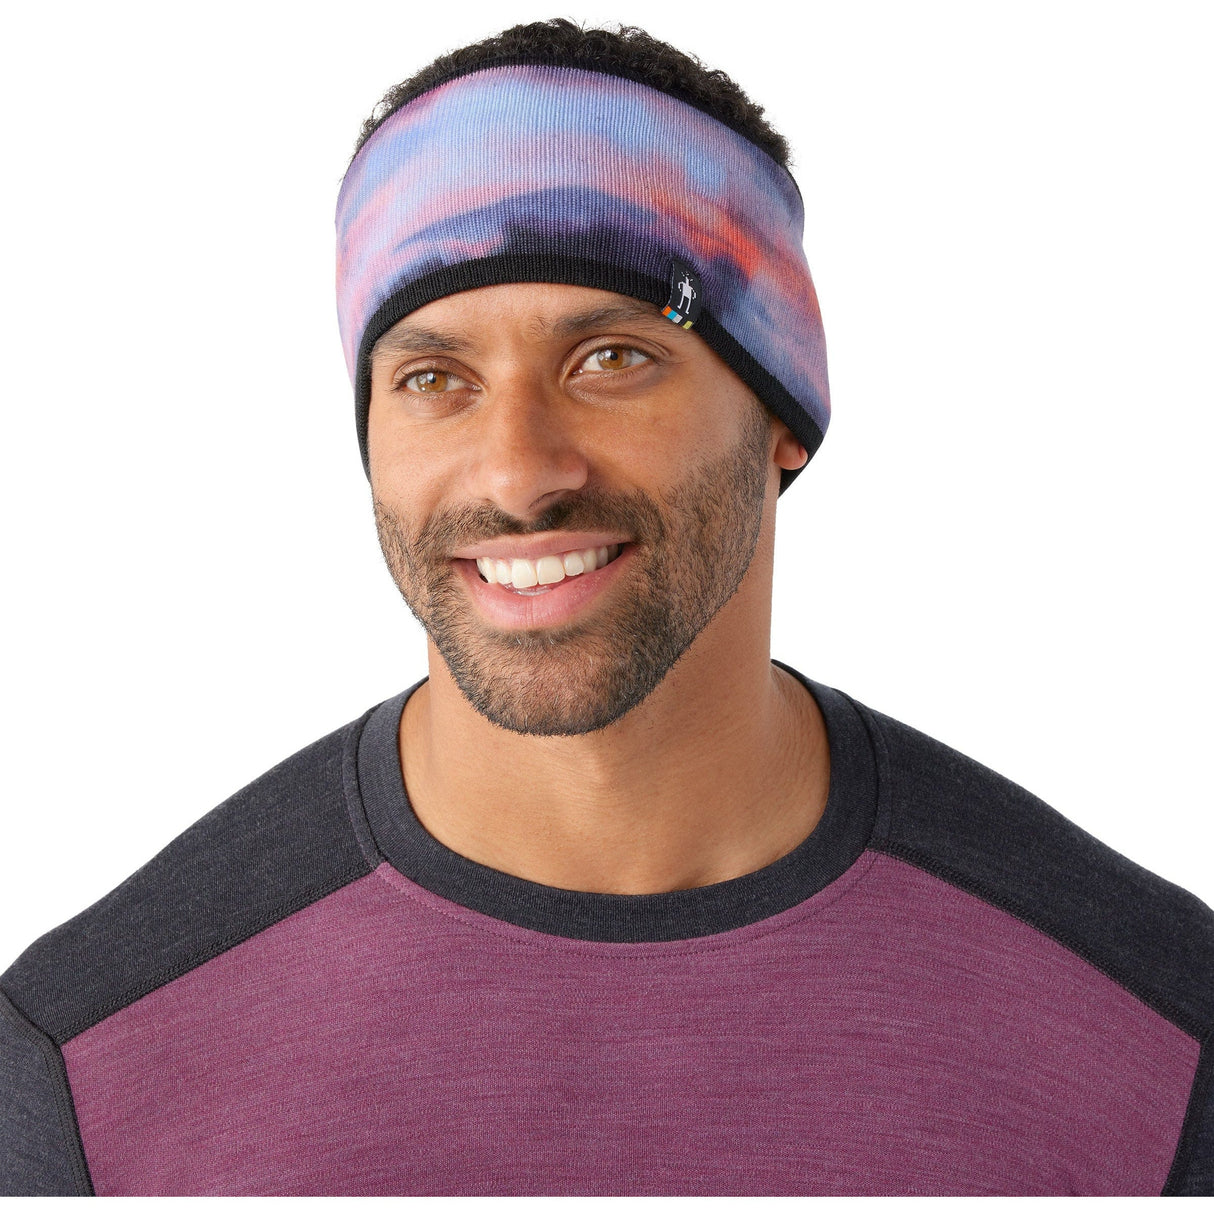 Smartwool Printed Headband  -  One Size Fits Most / Multi Color